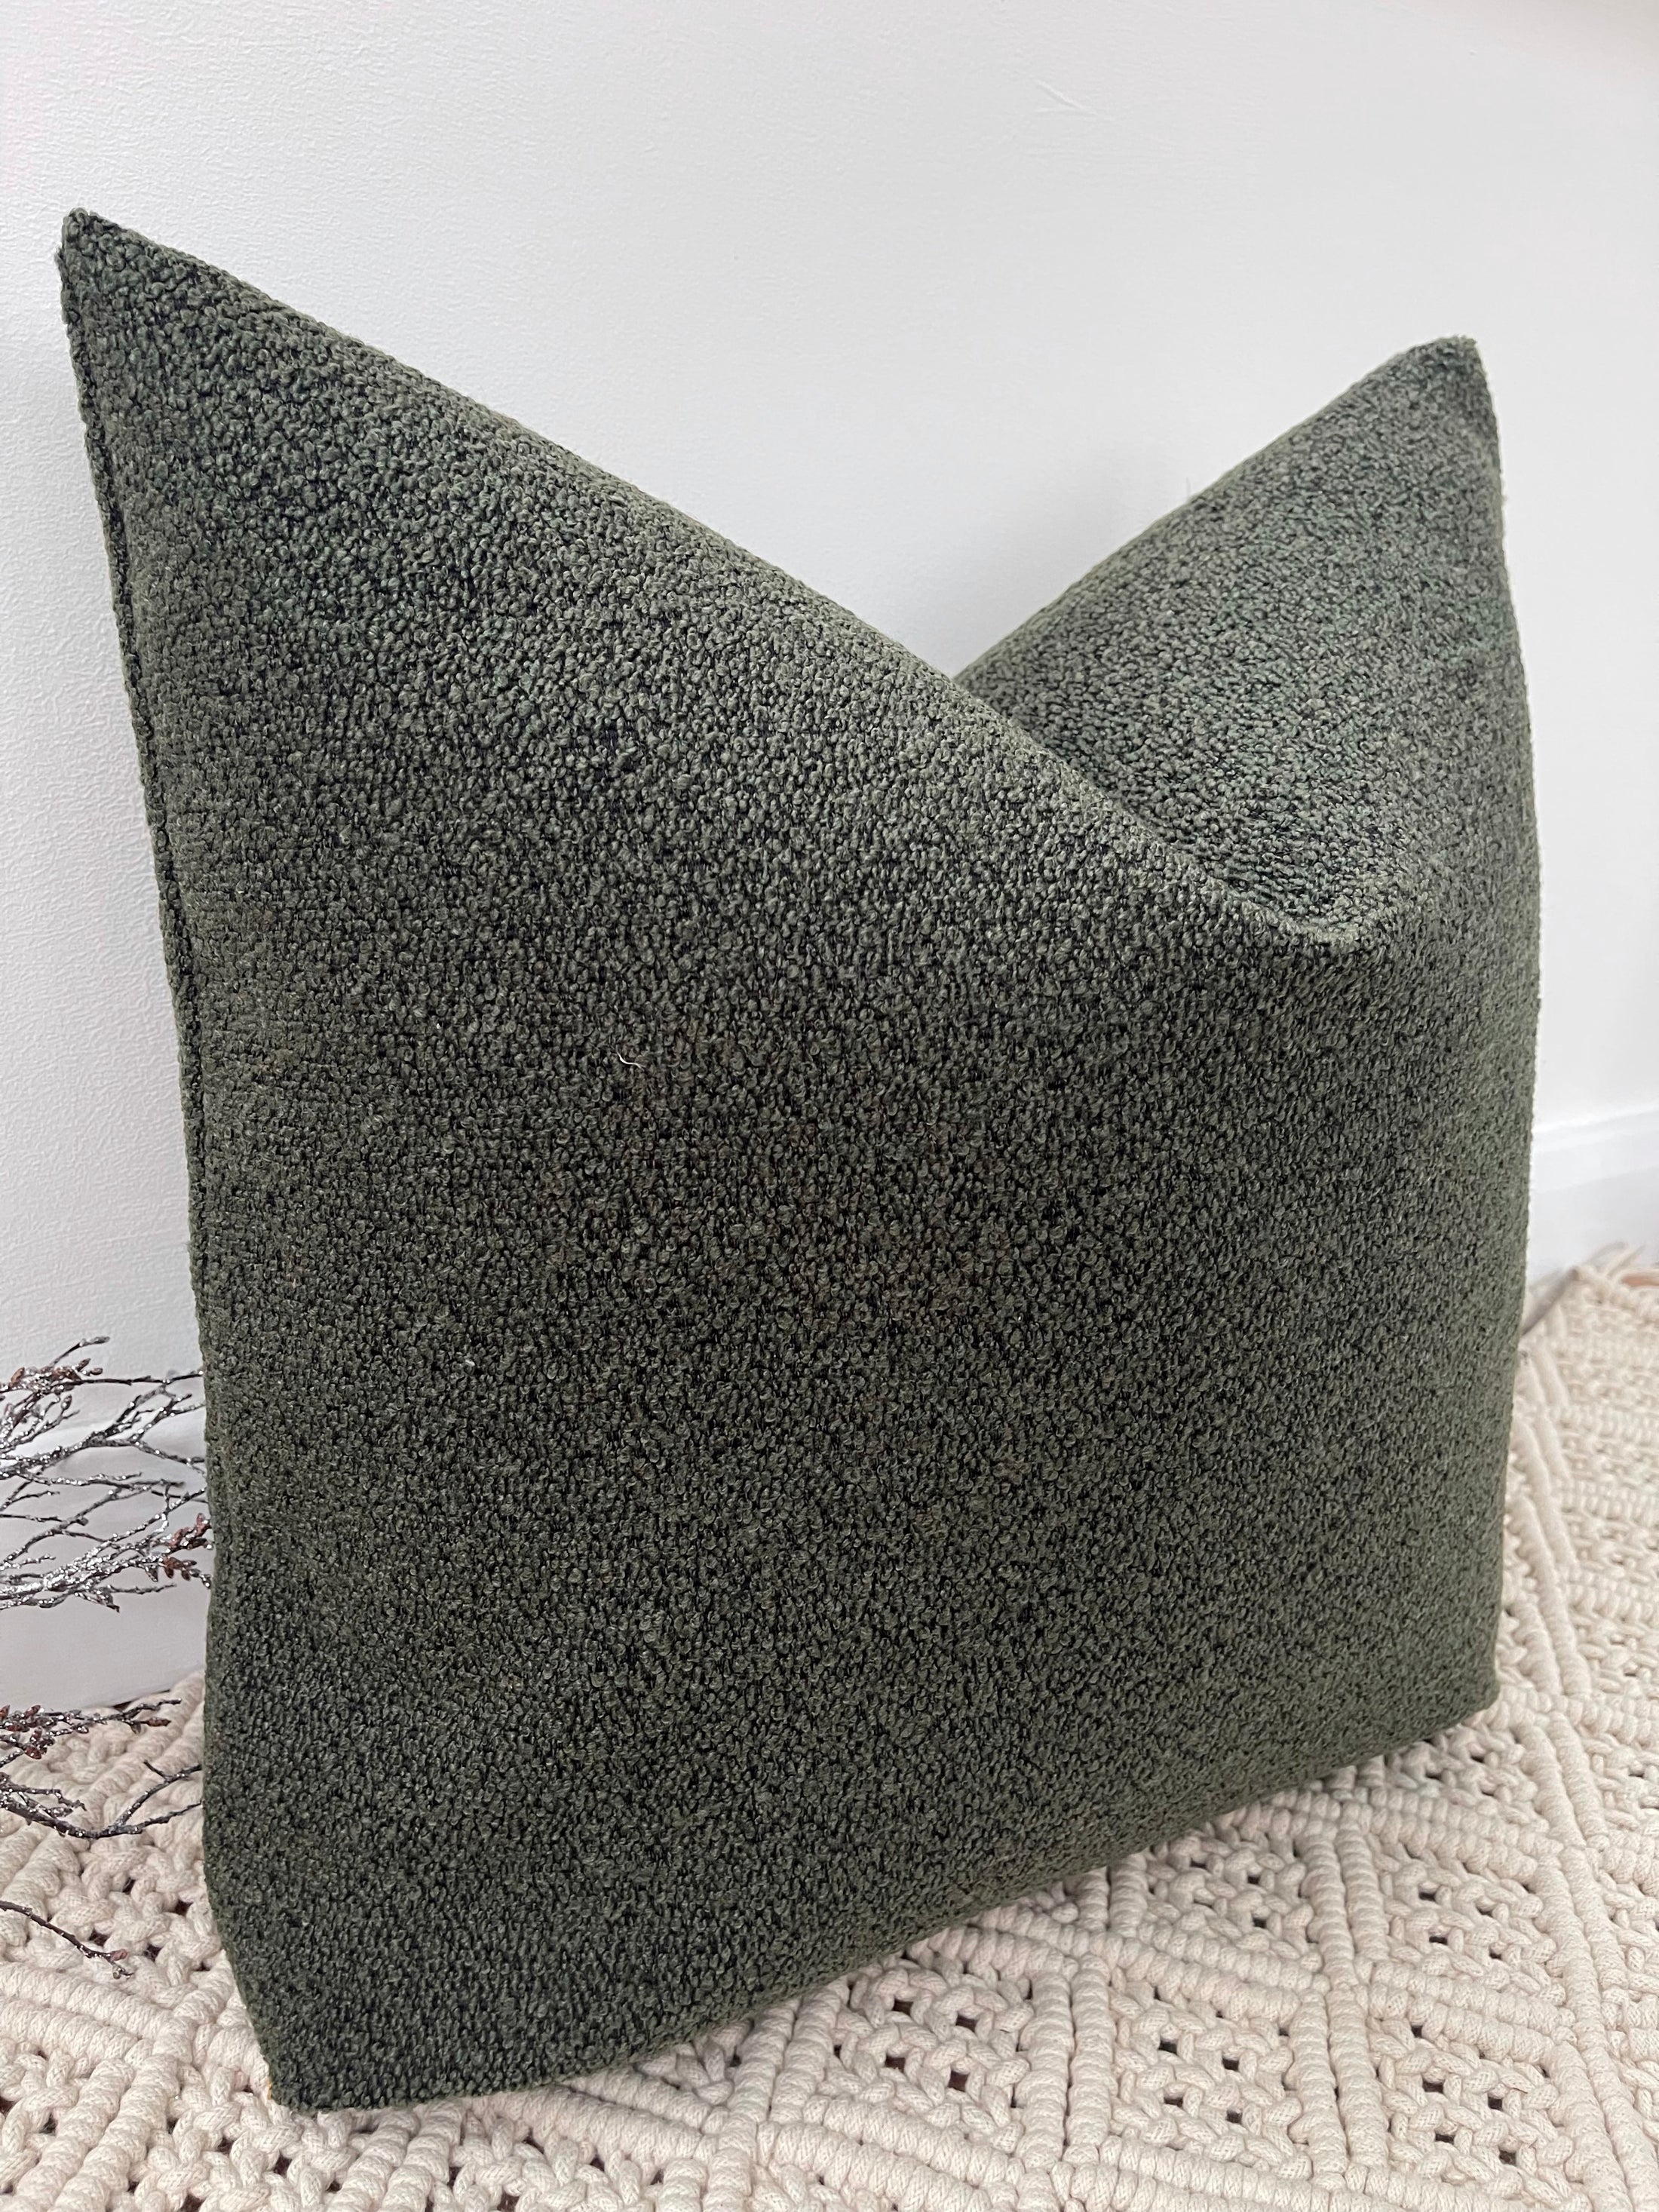 The Luxury Green Boucle - Style No. 128